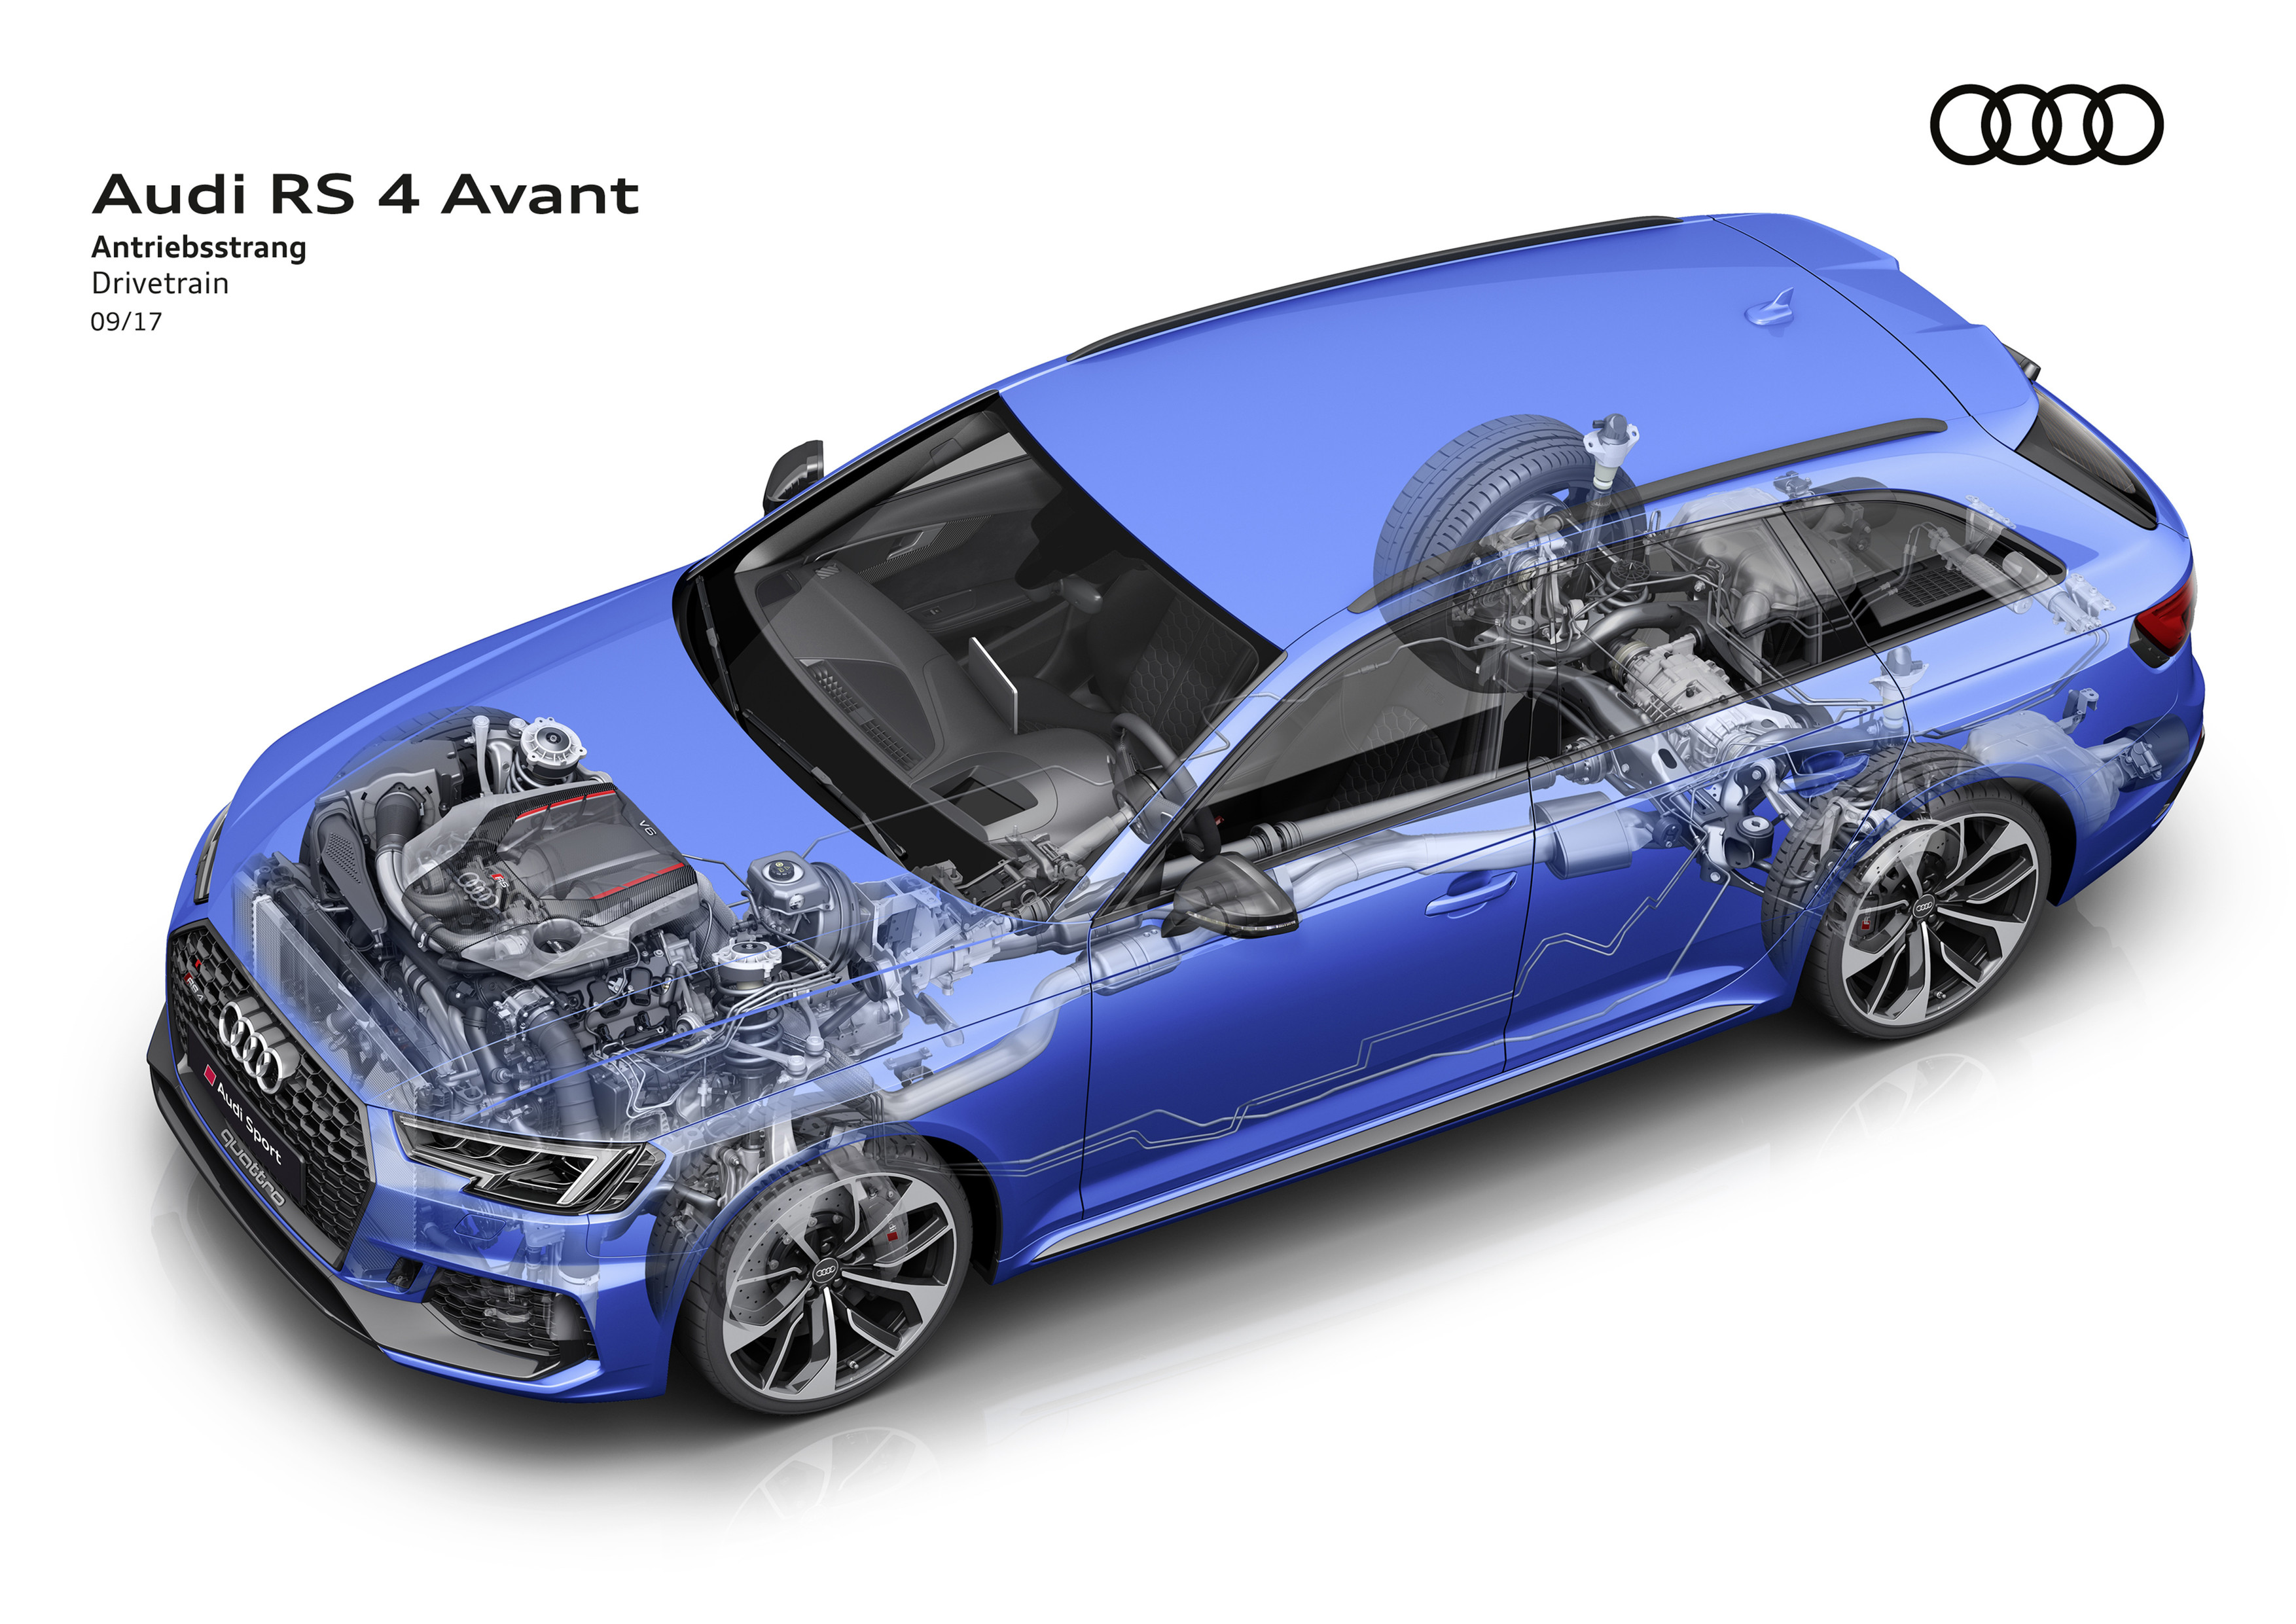 Audi RS 4 Avant wagon specifications